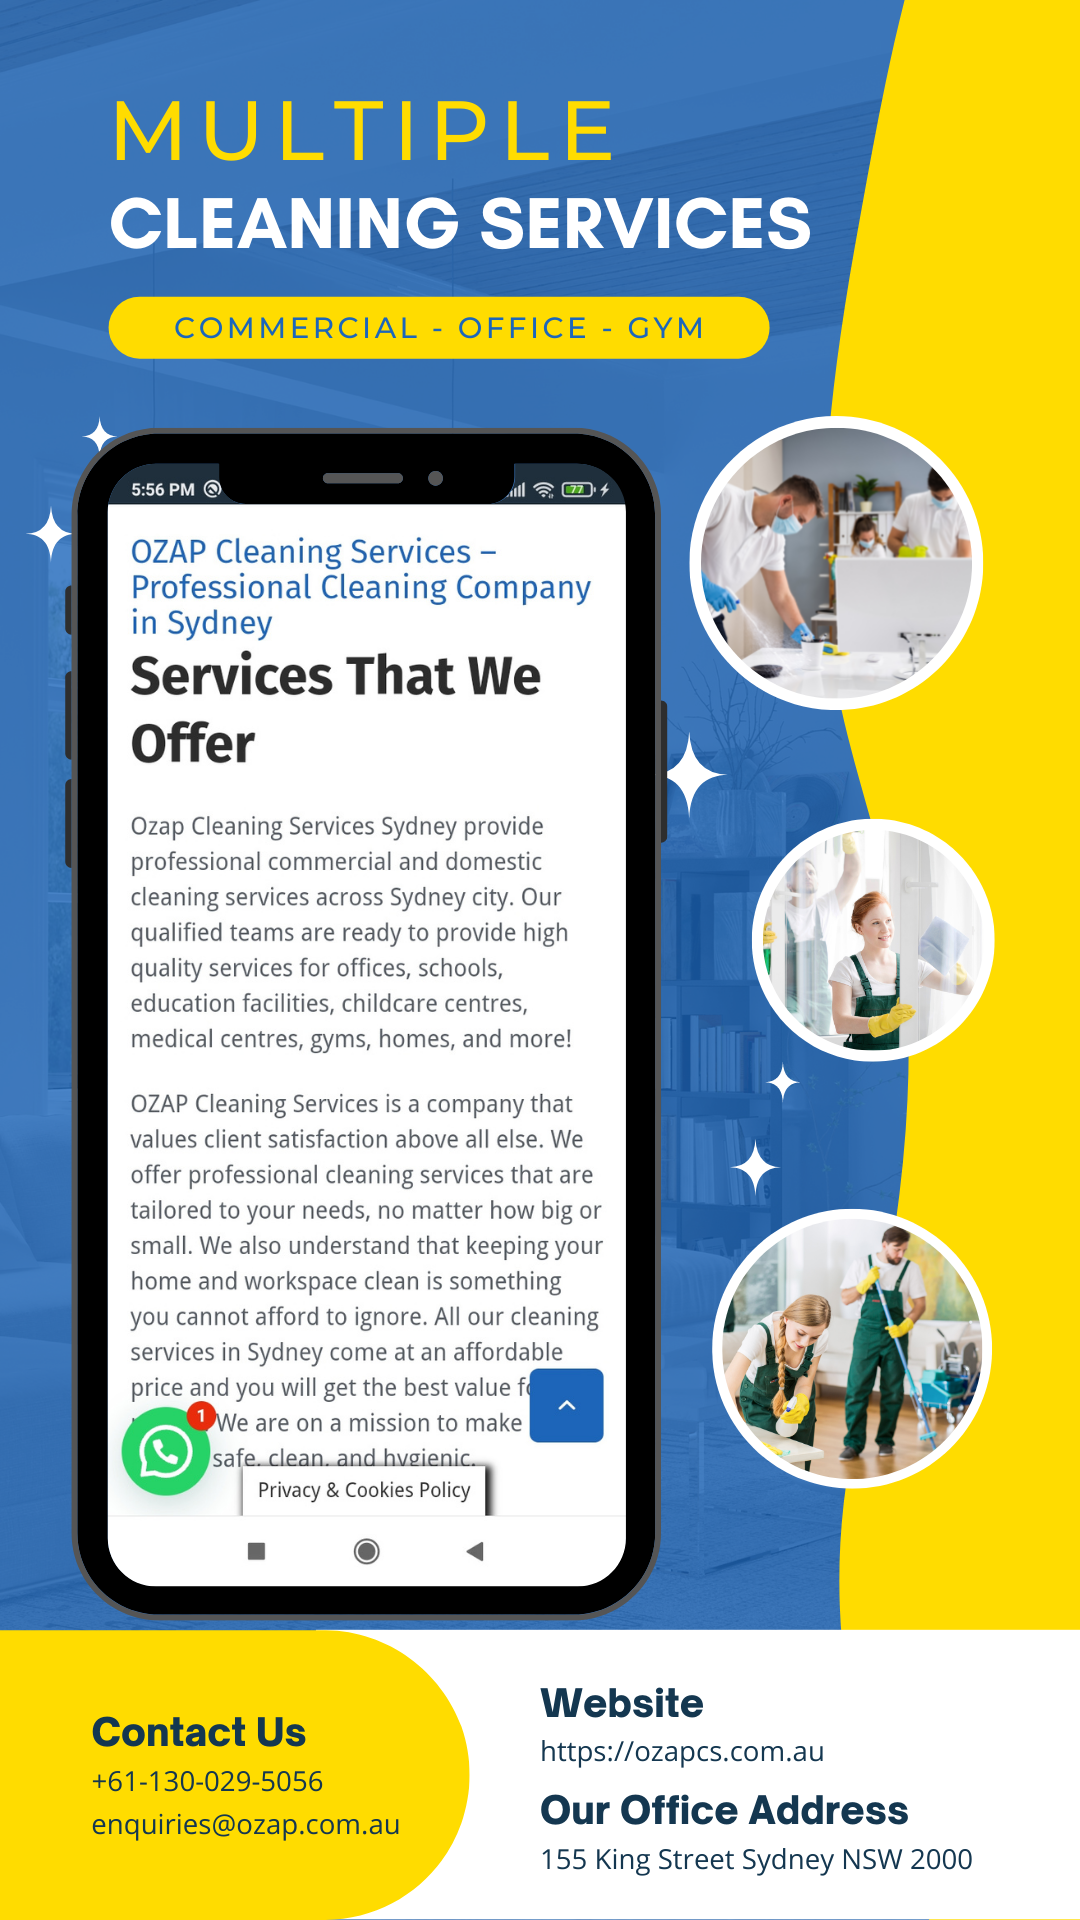 OZAP Cleaning Services Sydney